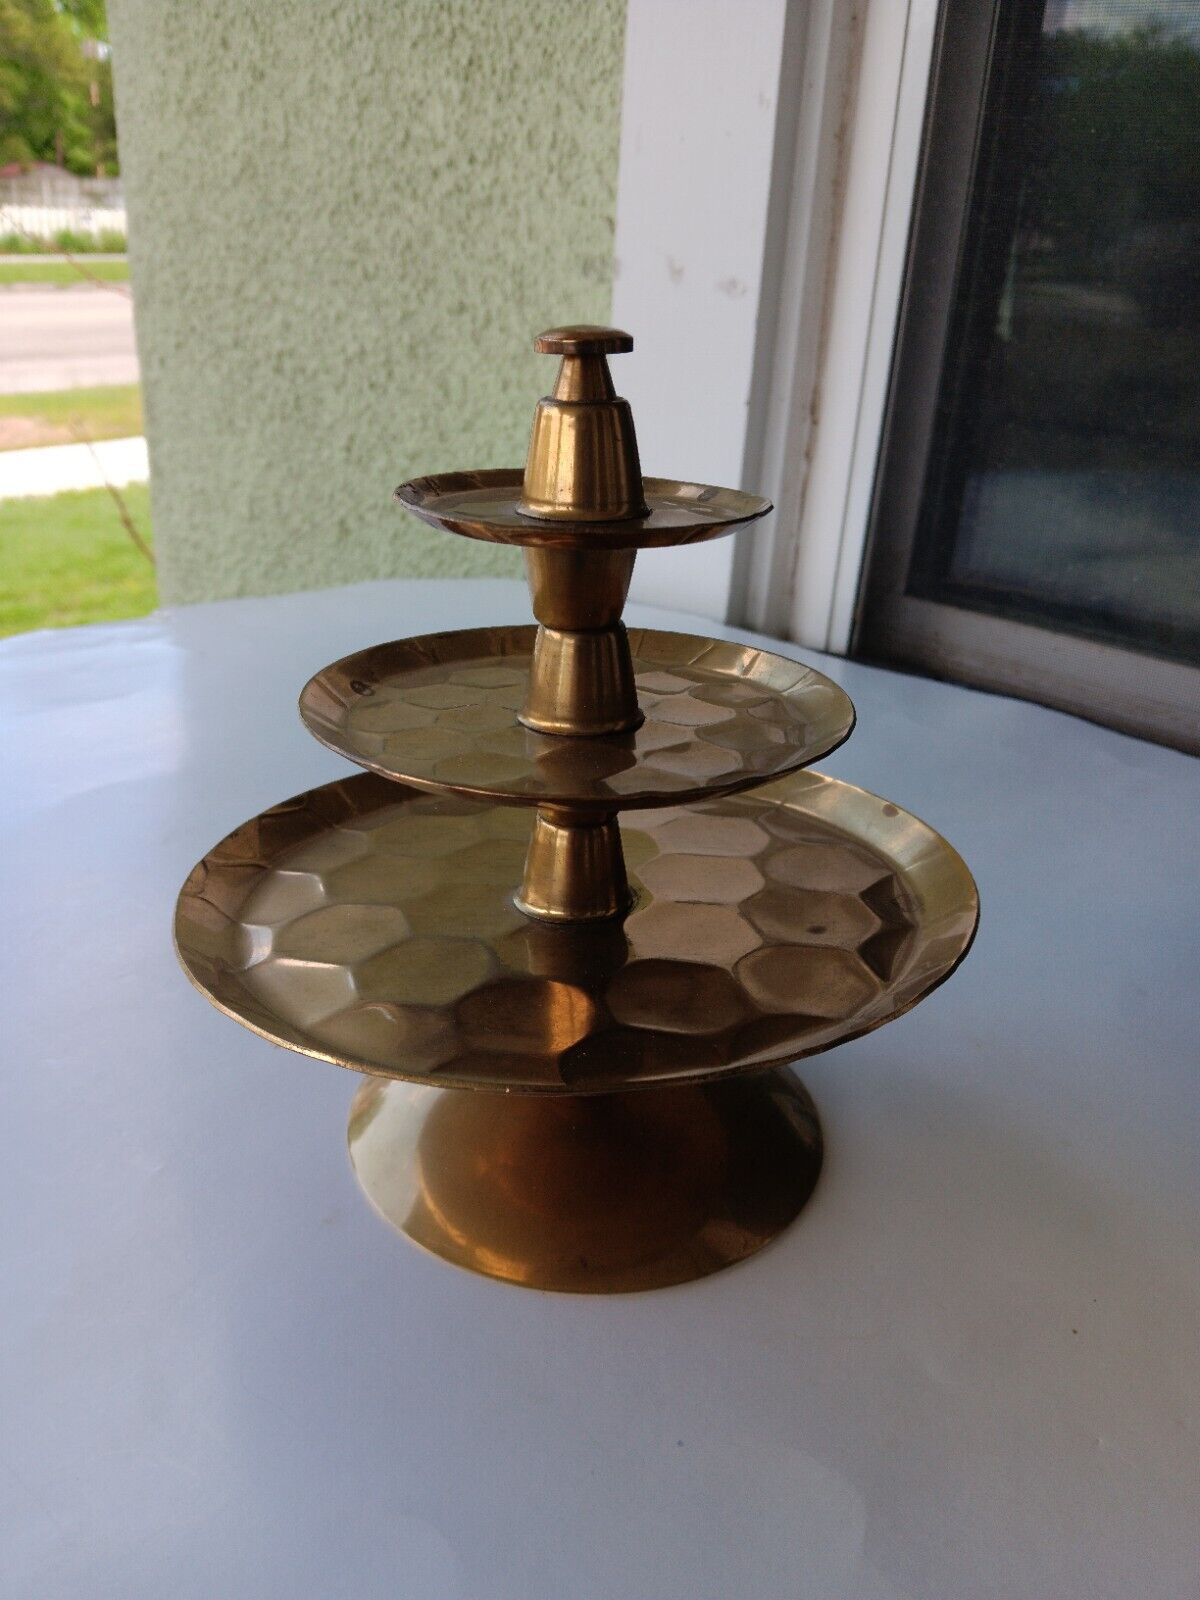 Vintage Solid Brass Serving Stand 3 Tier Tidbit Candy Tray Boho Cottagecore 9x7